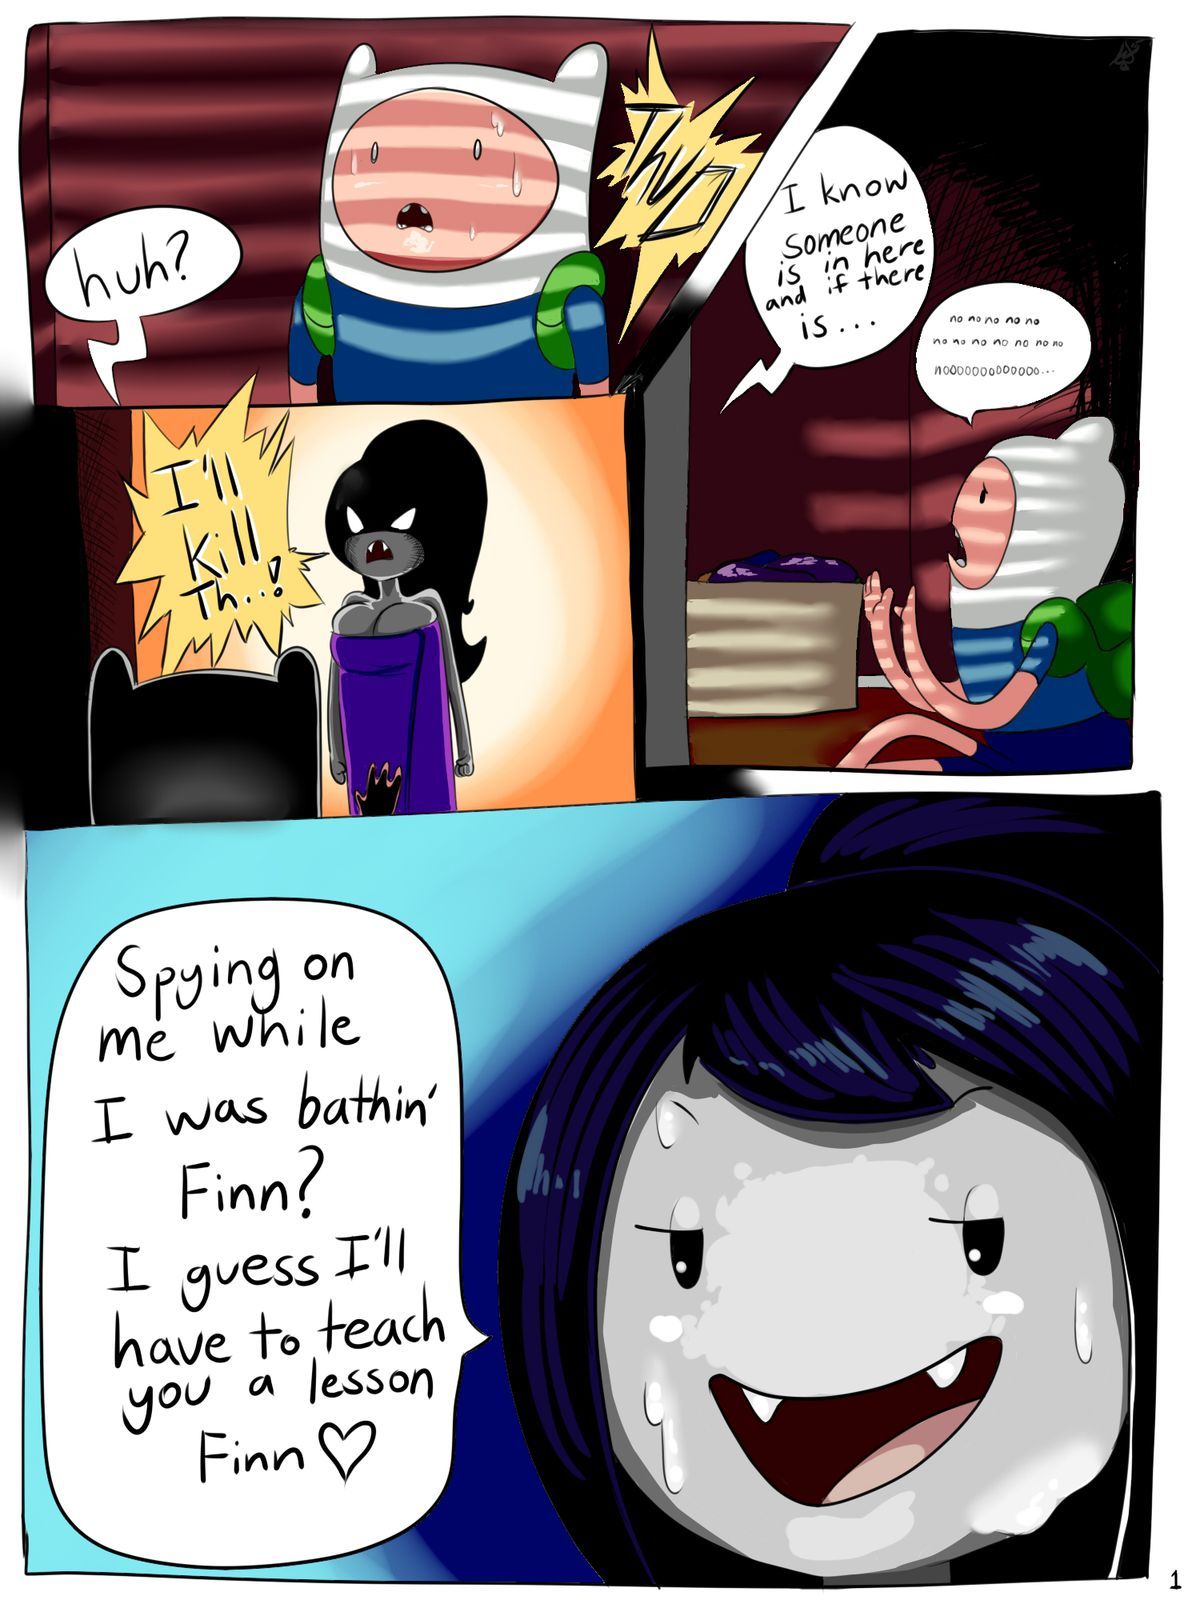 Adventure_Time_-_Putting_A_Stake_in_Marceline comix_59929.jpg